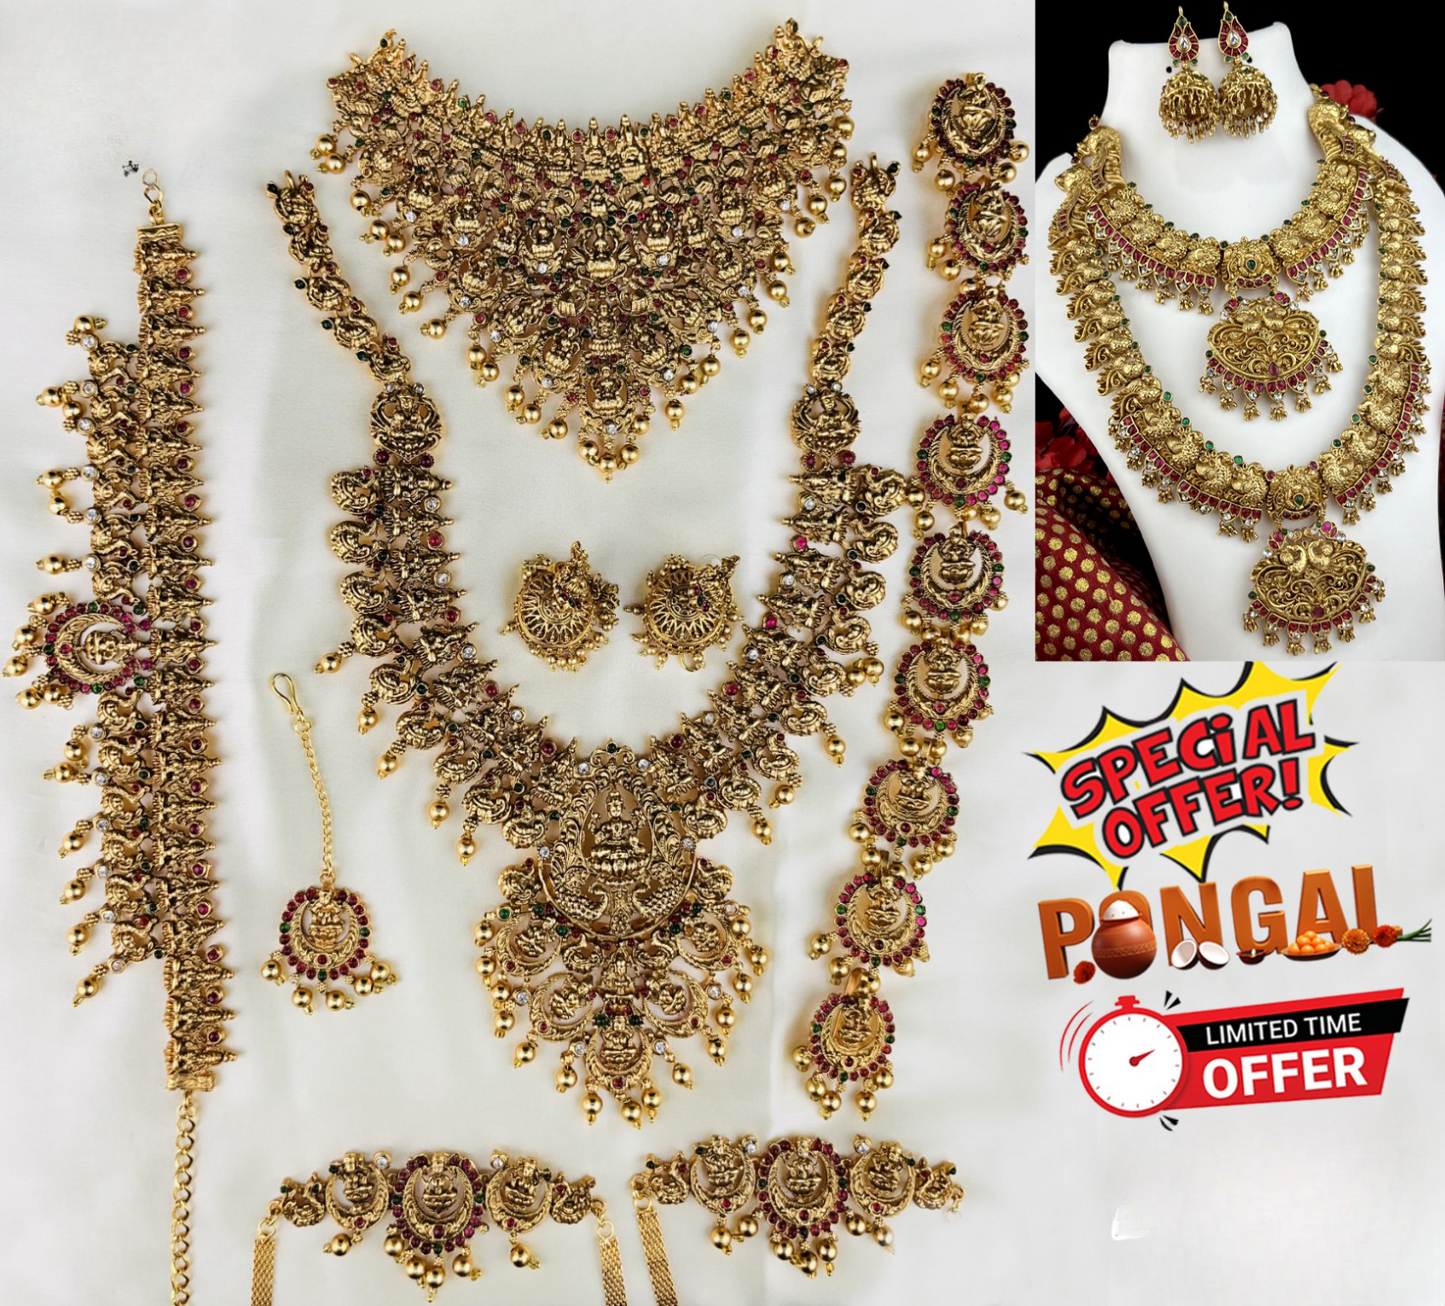 Bestseller Matte Finish Temple Jewelry Full Bridal Set Haram Necklace Set with Earrings -Pongal Offer